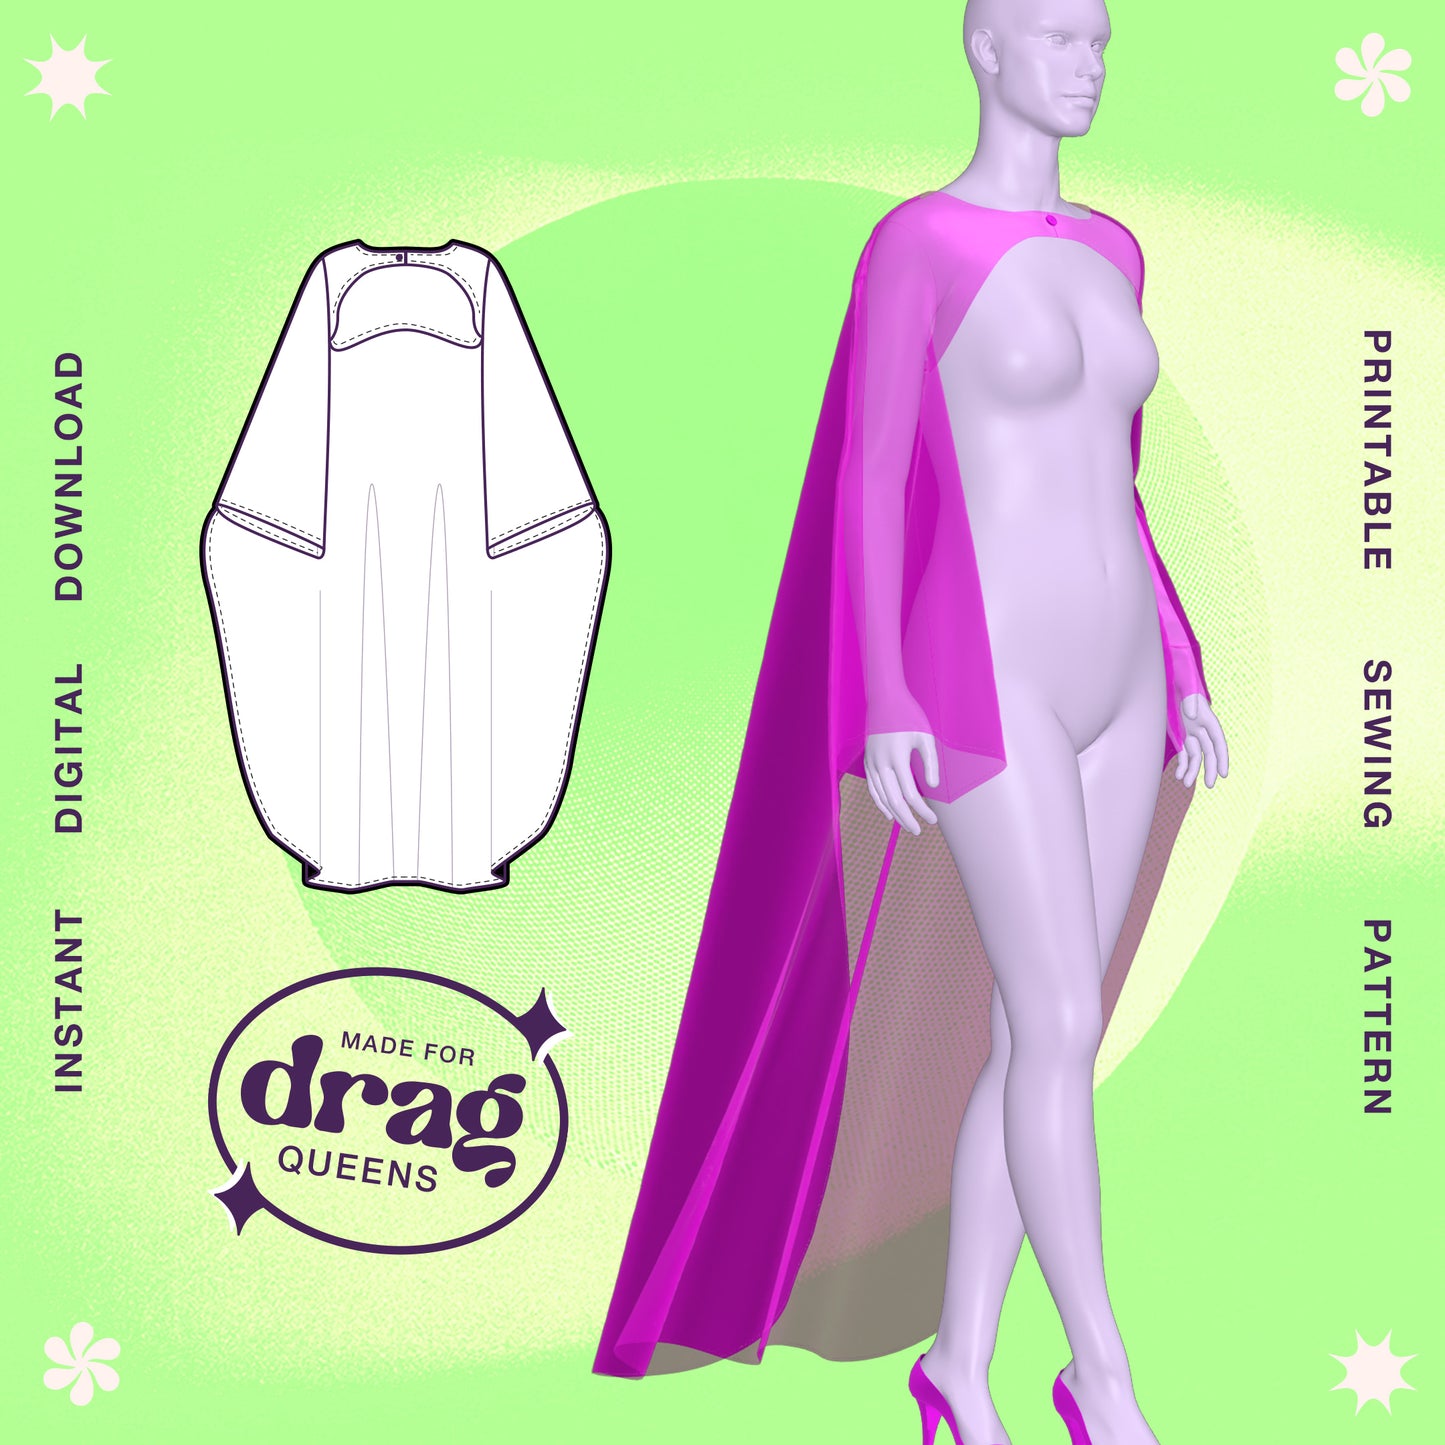 katkow drag queen shrug cape sewing pattern thumb